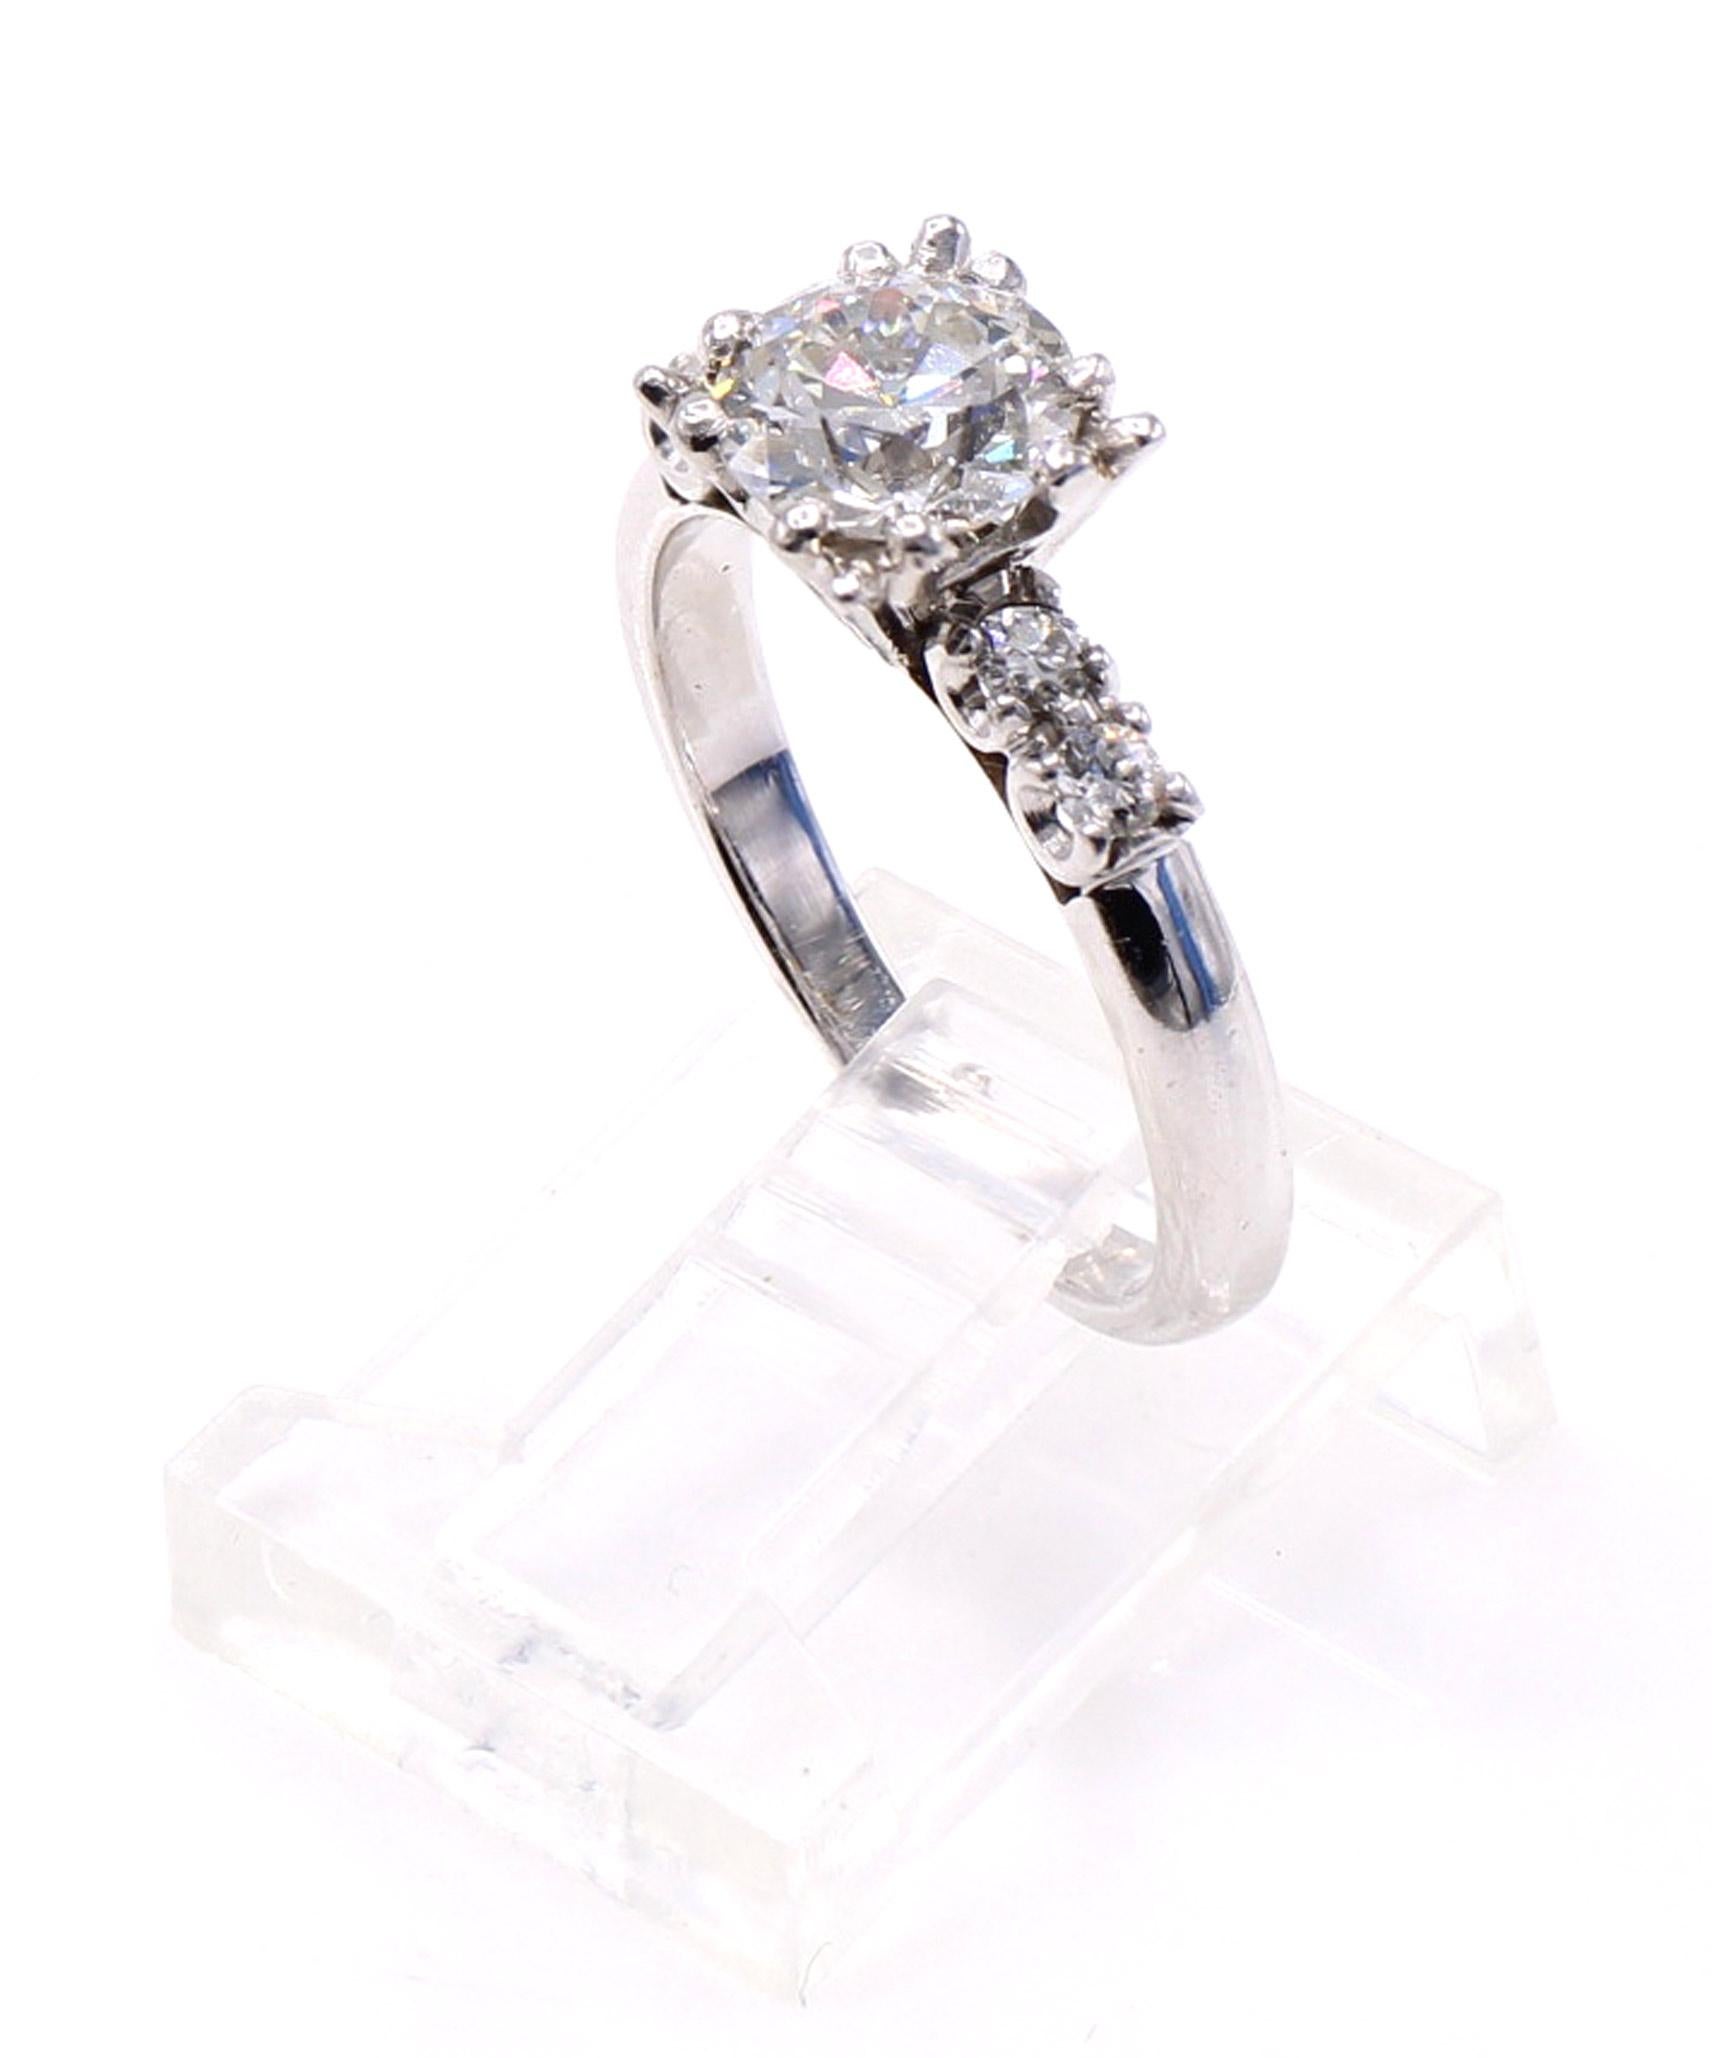 Beautiful handmade platinum and 14 karat white gold engagement ring centrally set with one Old European Cut diamond weighing 1.10 carats. This old-cut diamond has an amazing life, fire, and sparkle, and the fishtail prong setting gives this ring its